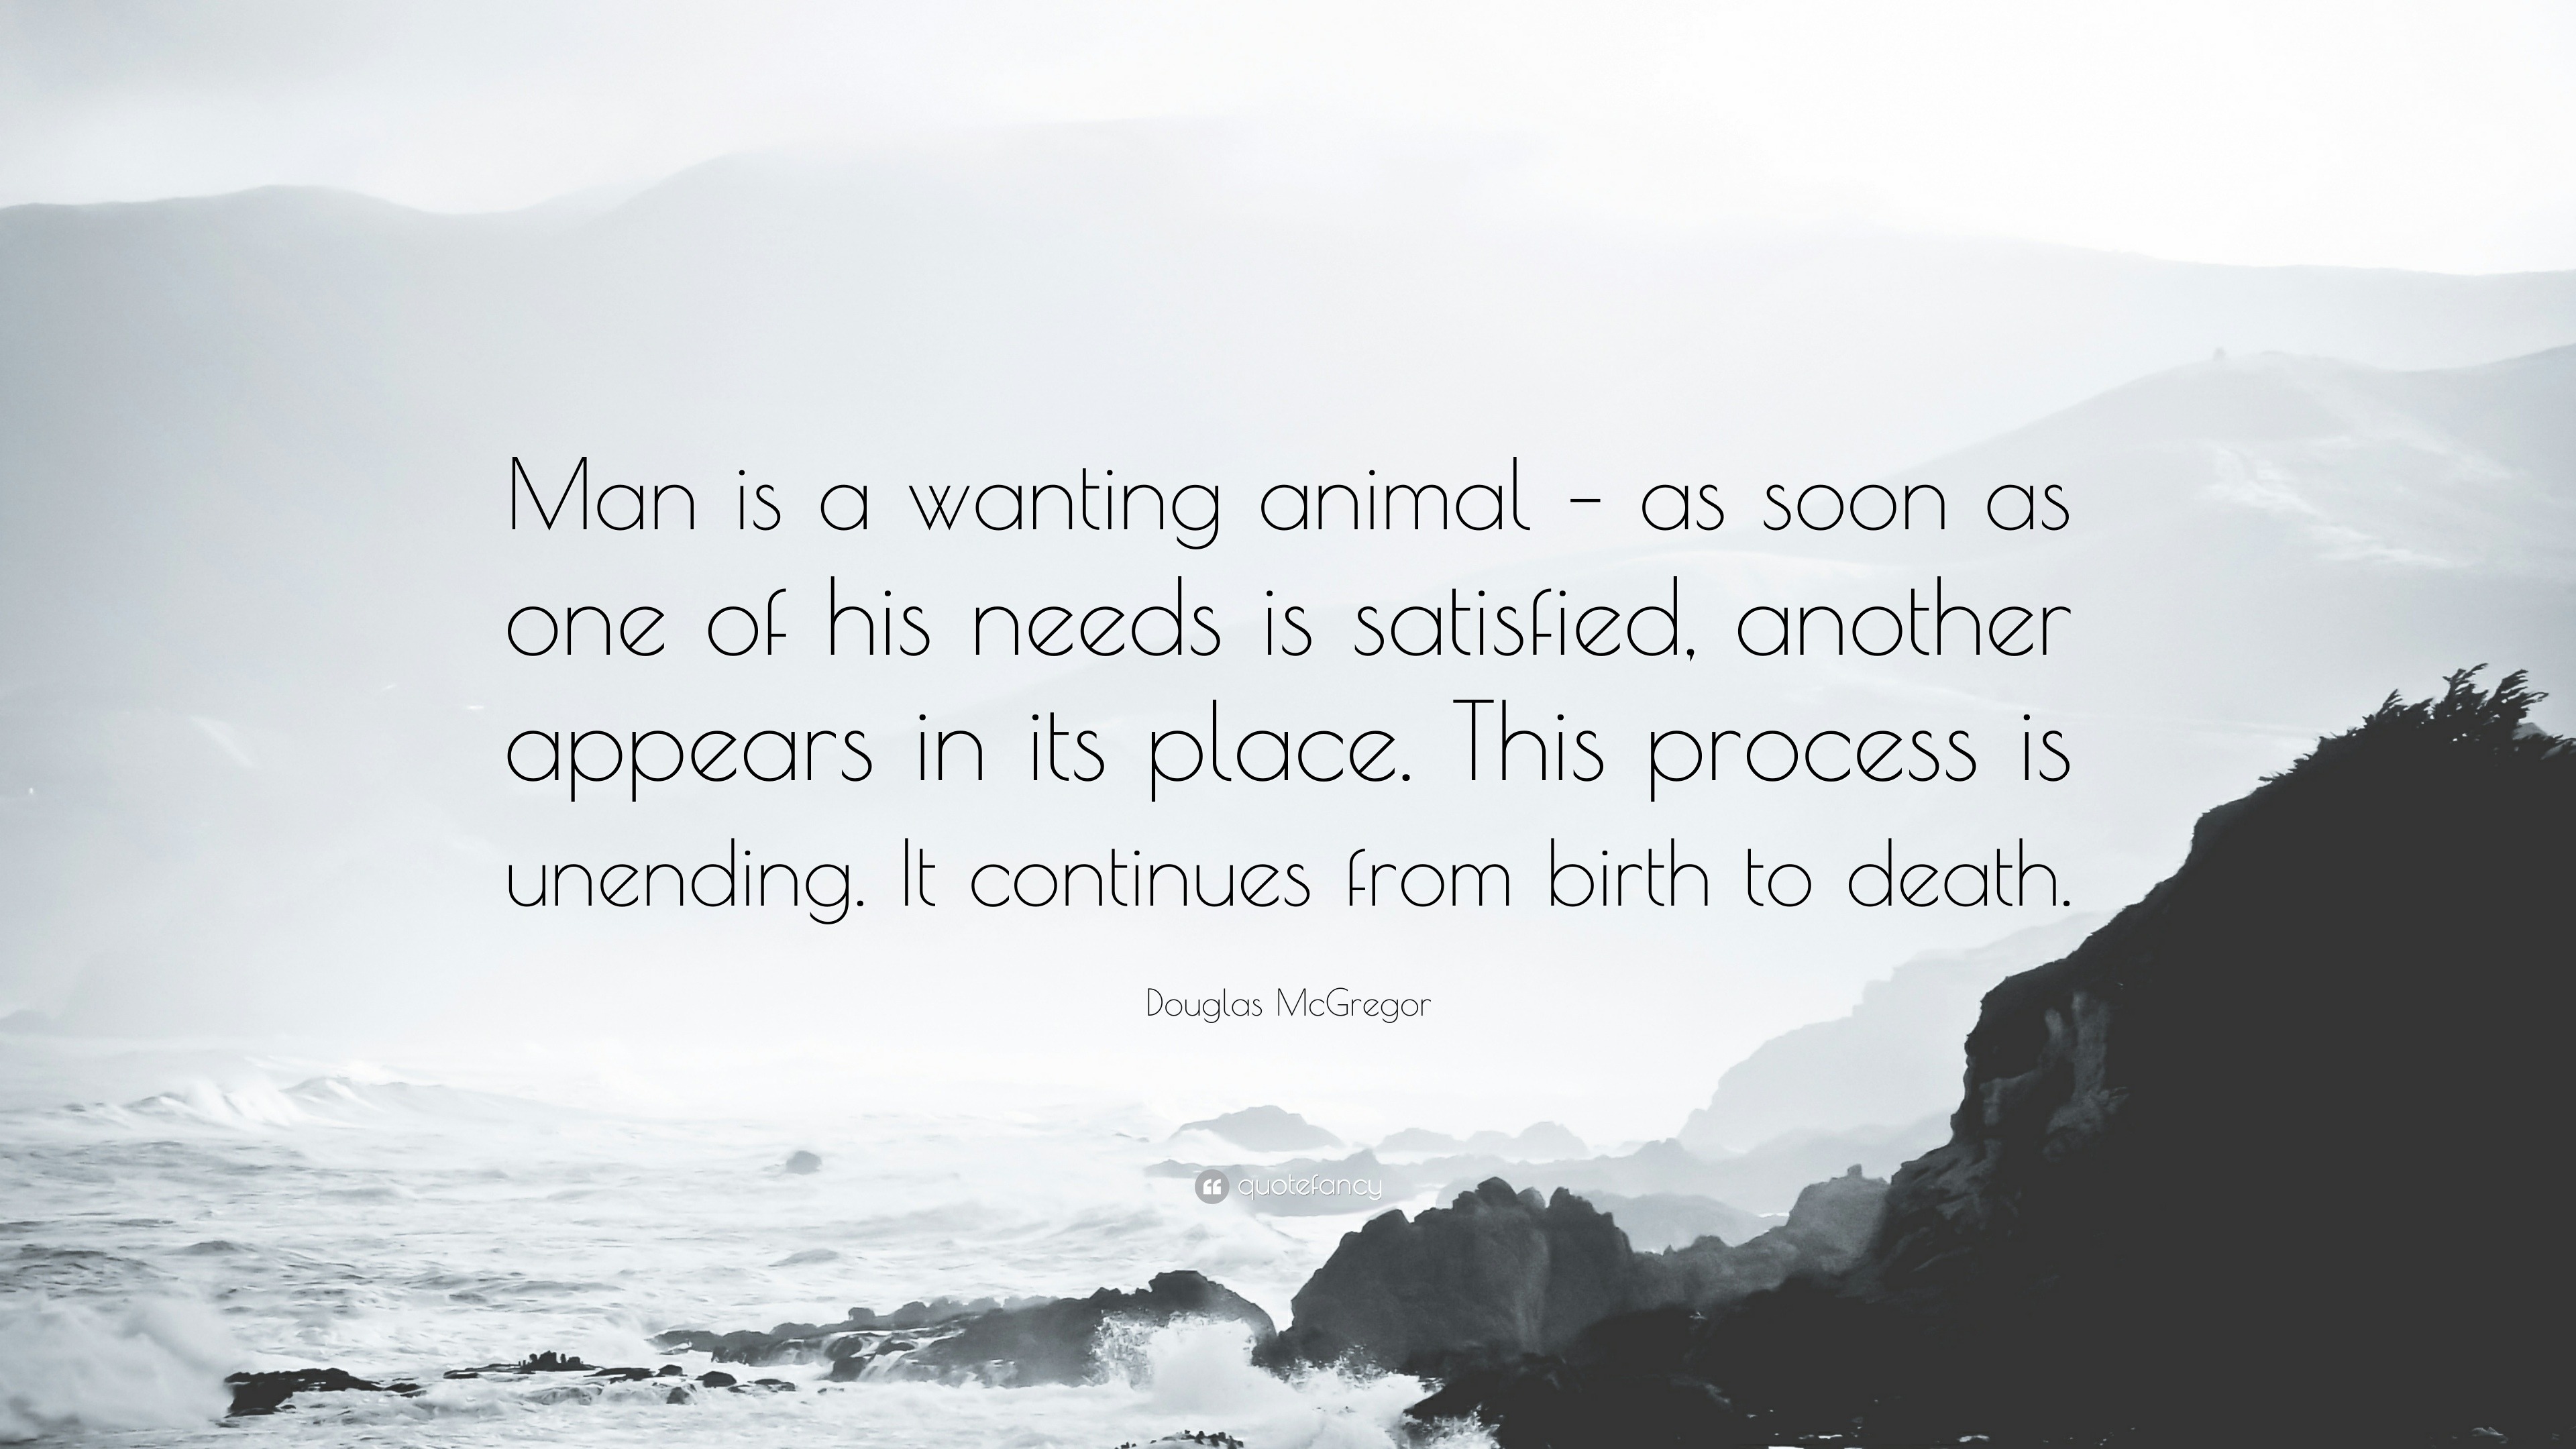 Douglas McGregor Quote: “Man is a wanting animal – as soon as one of